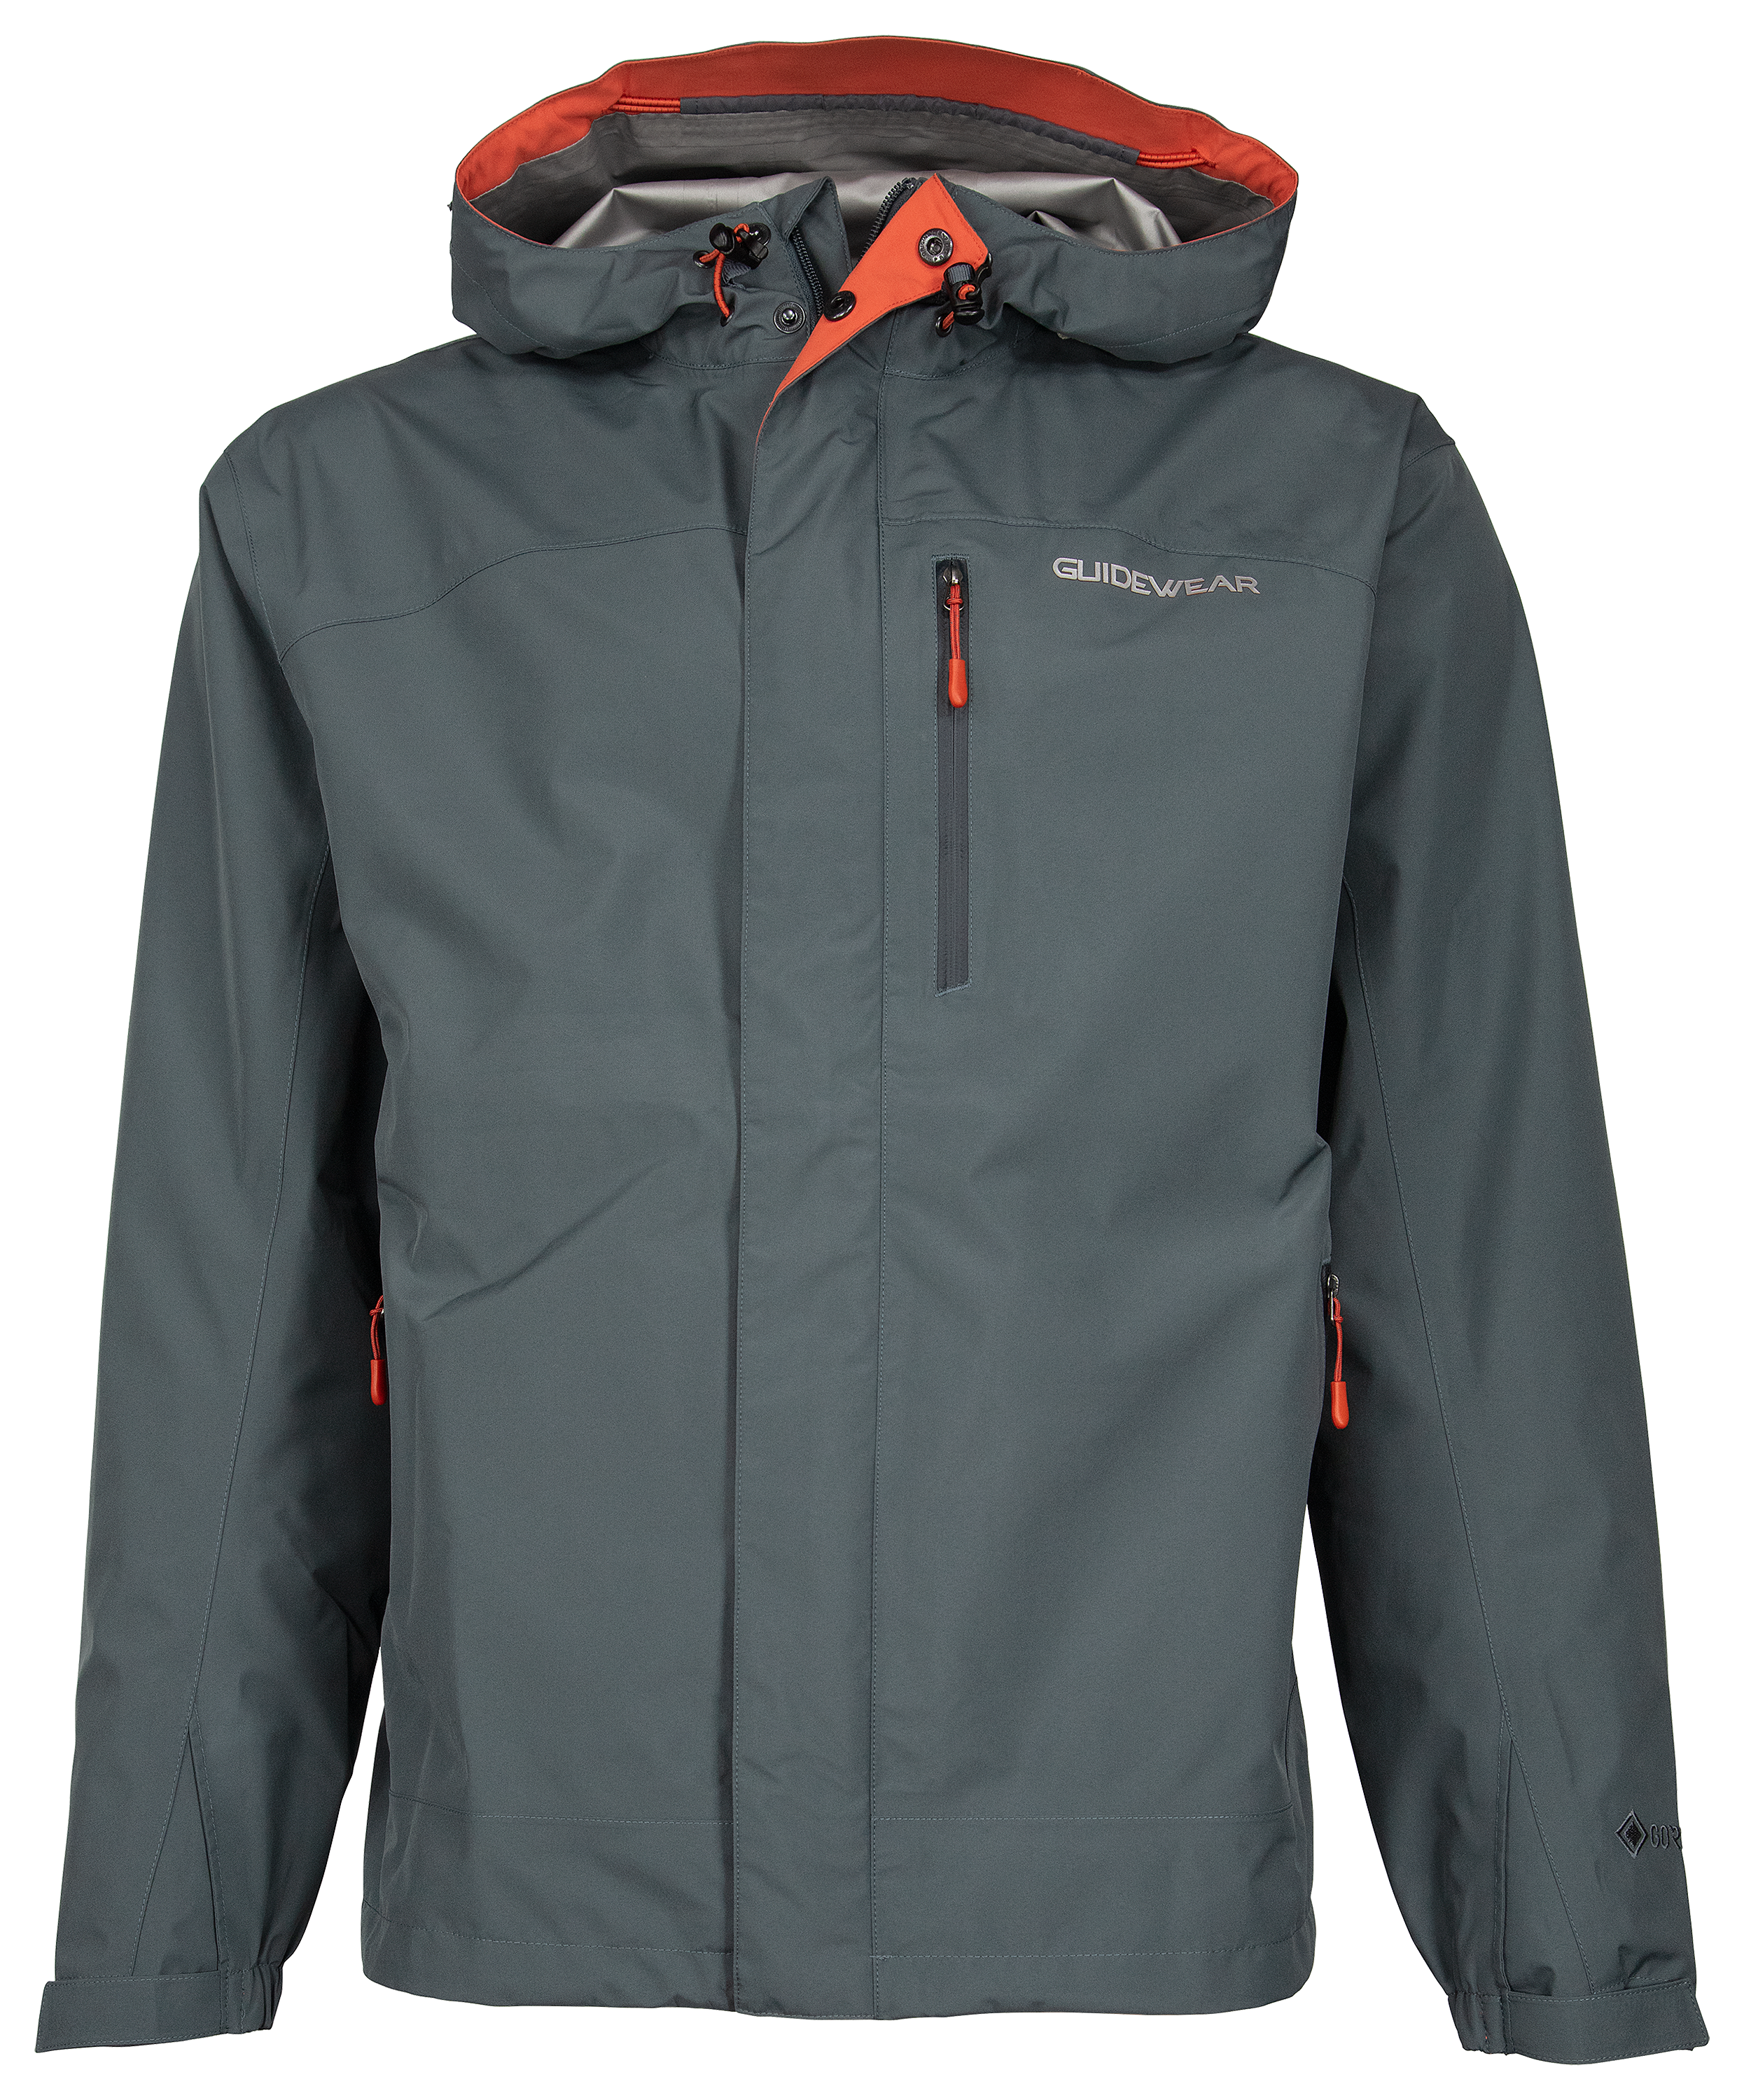 Johnny Morris Bass Pro Shops Guidewear Rainy River Jacket with GORE-TEX Paclite for Men - Monument Grey - 3xlt